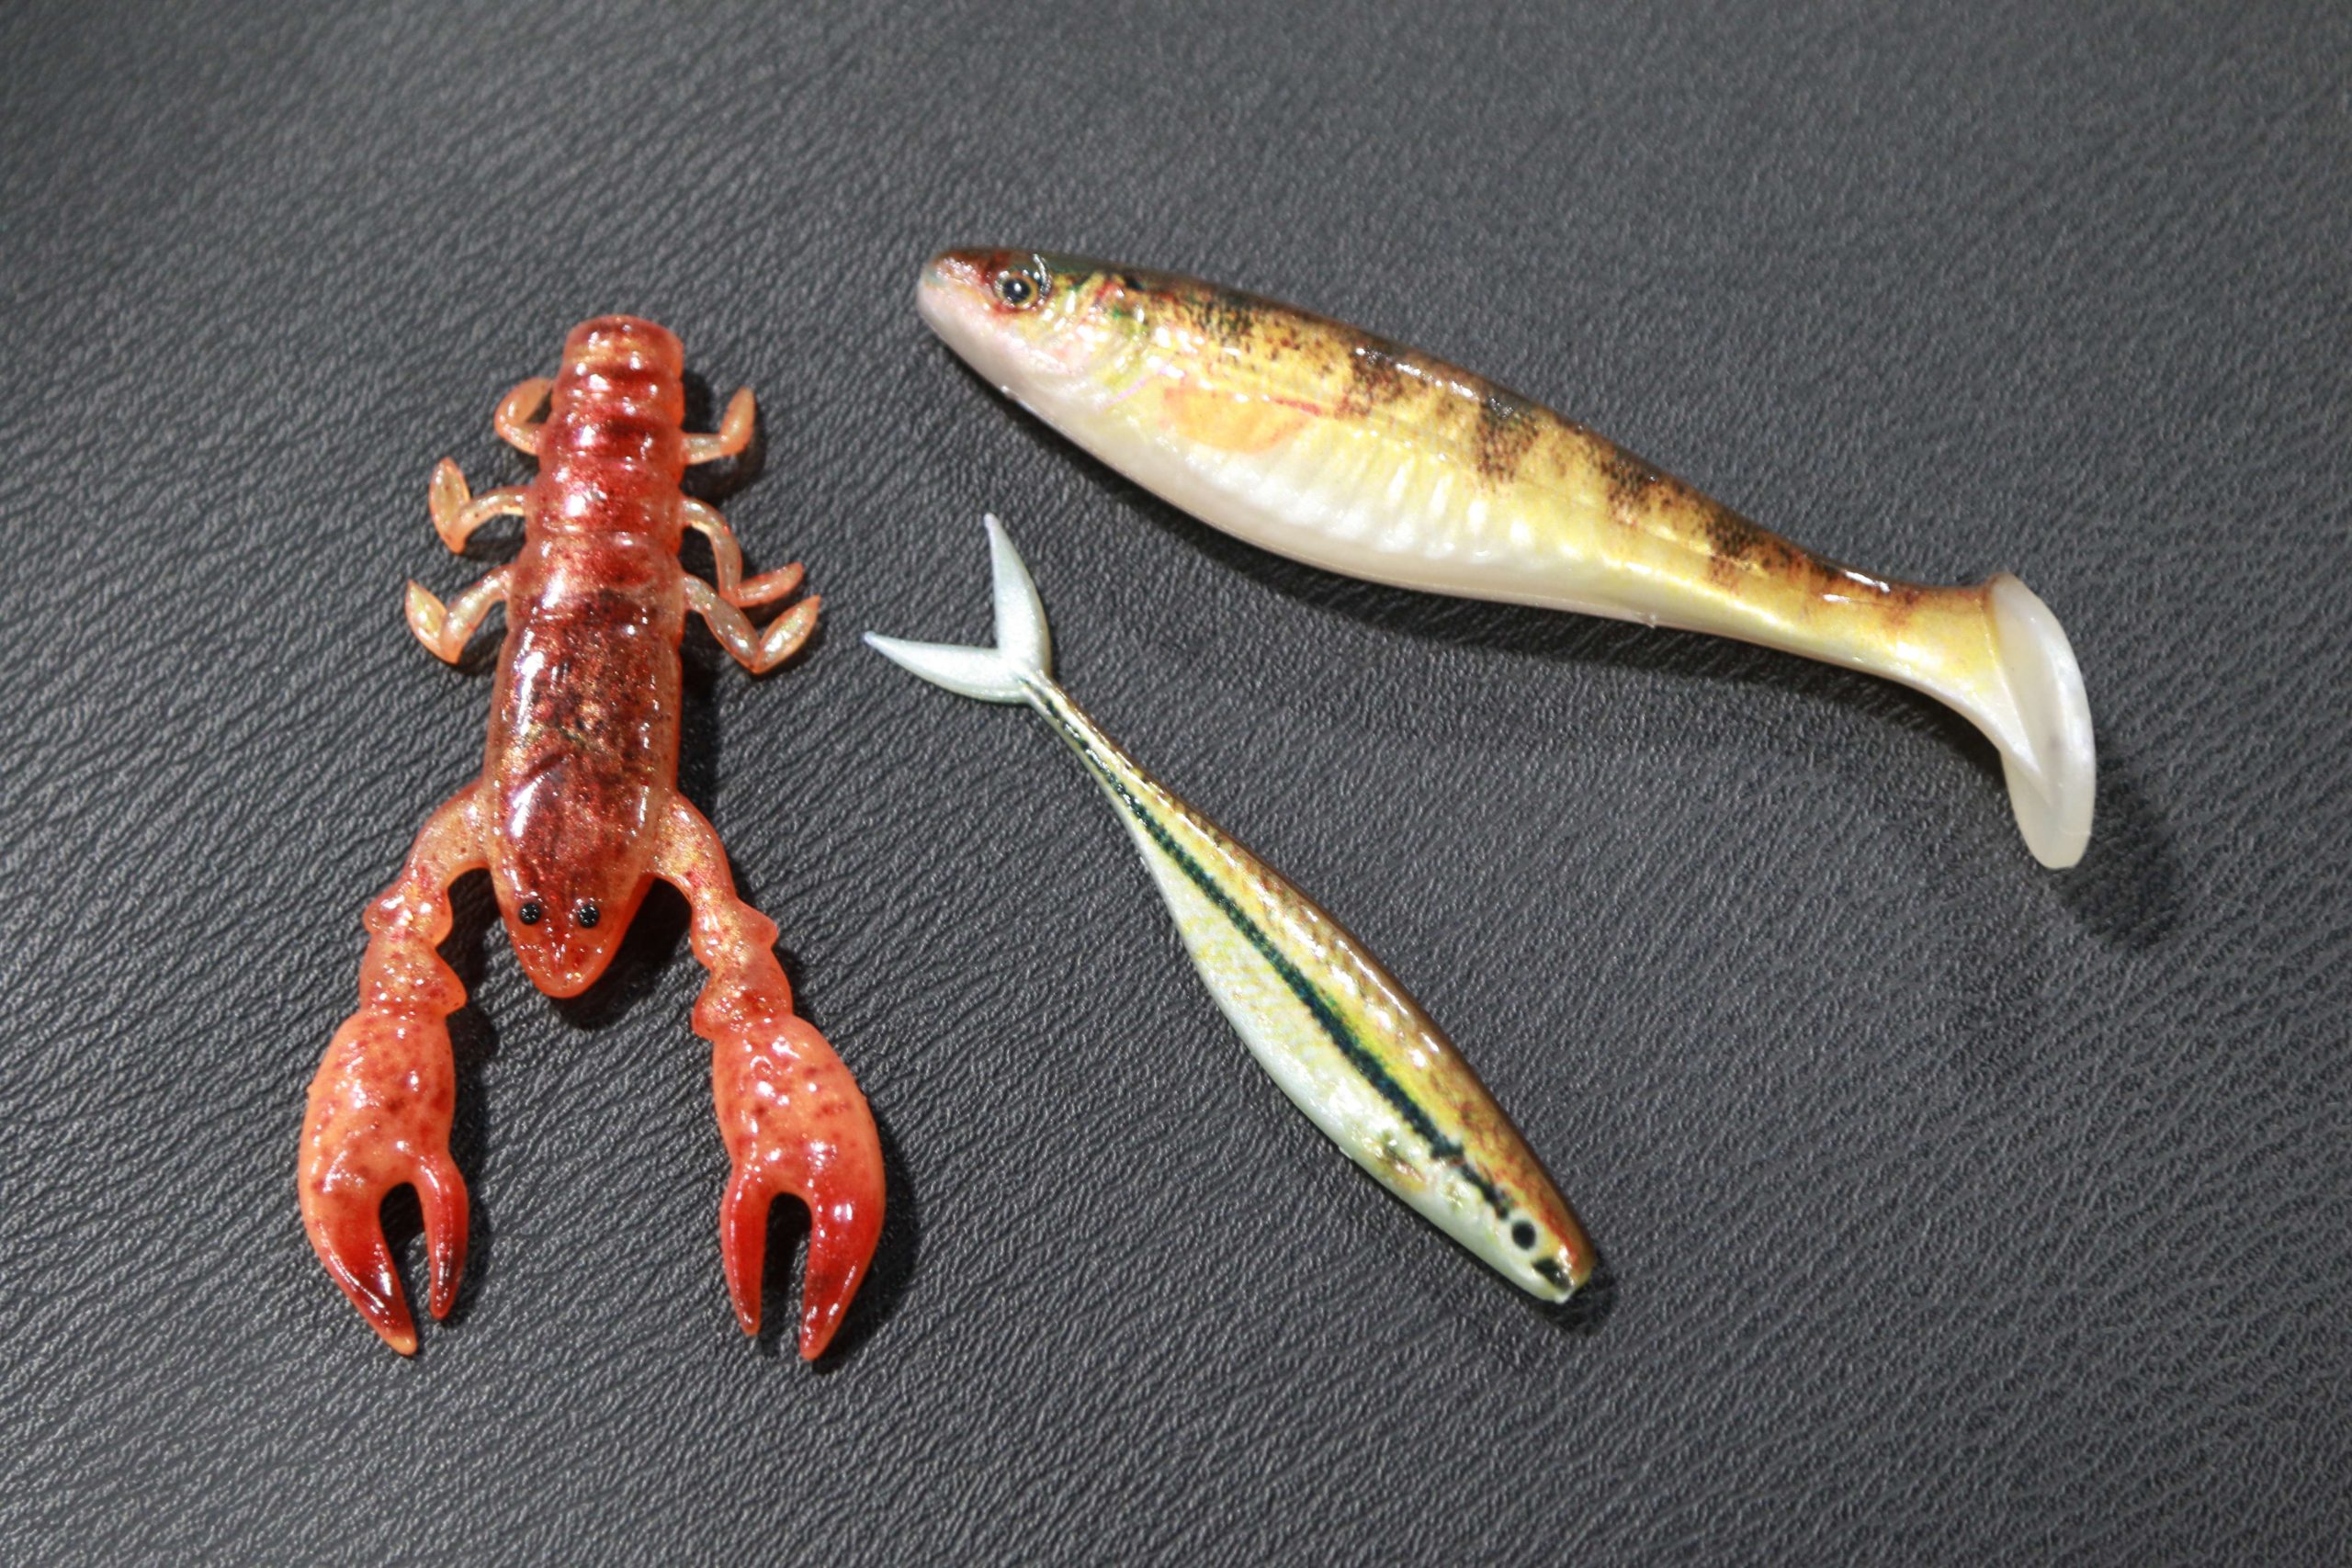 A key feature of the new Berkley Powerbait Champ Craw, Minnow and Swimmer is the HD Tru Color finish.